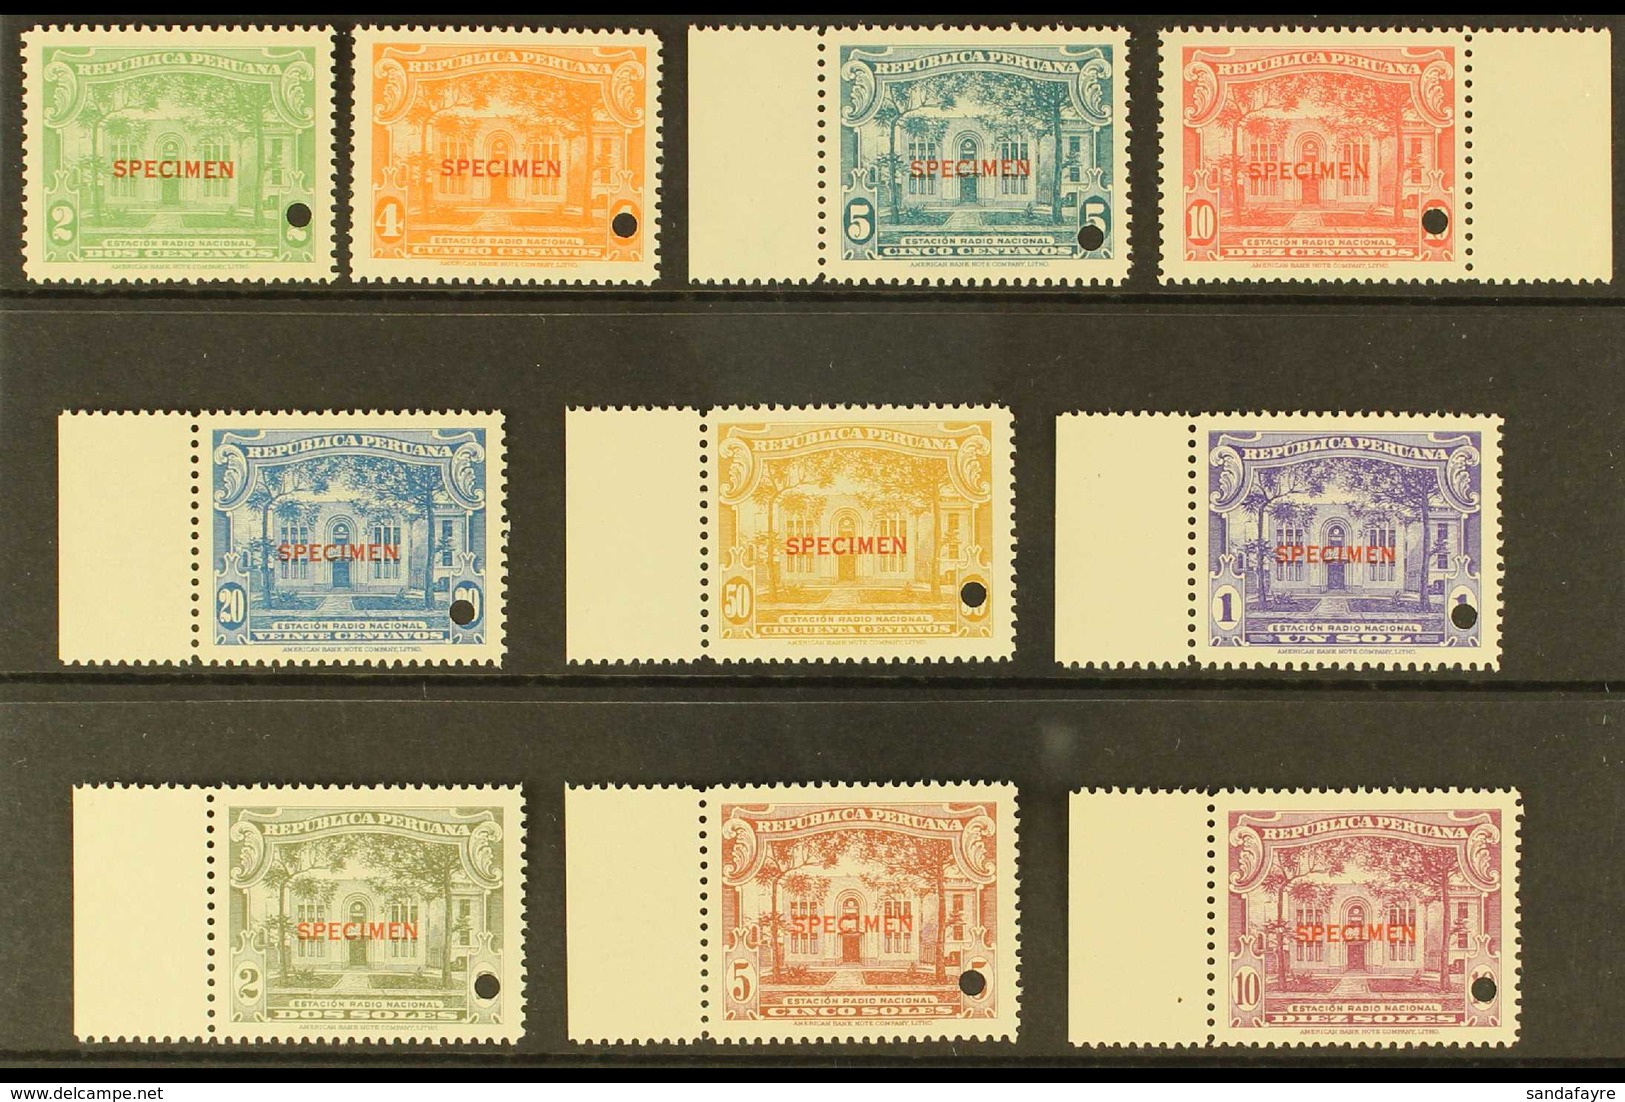 REVENUES NATIONAL RADIO STAMPS 1938 Complete Set With "SPECIMEN" Overprints And Small Security Punch Holes, Never Hinged - Peru